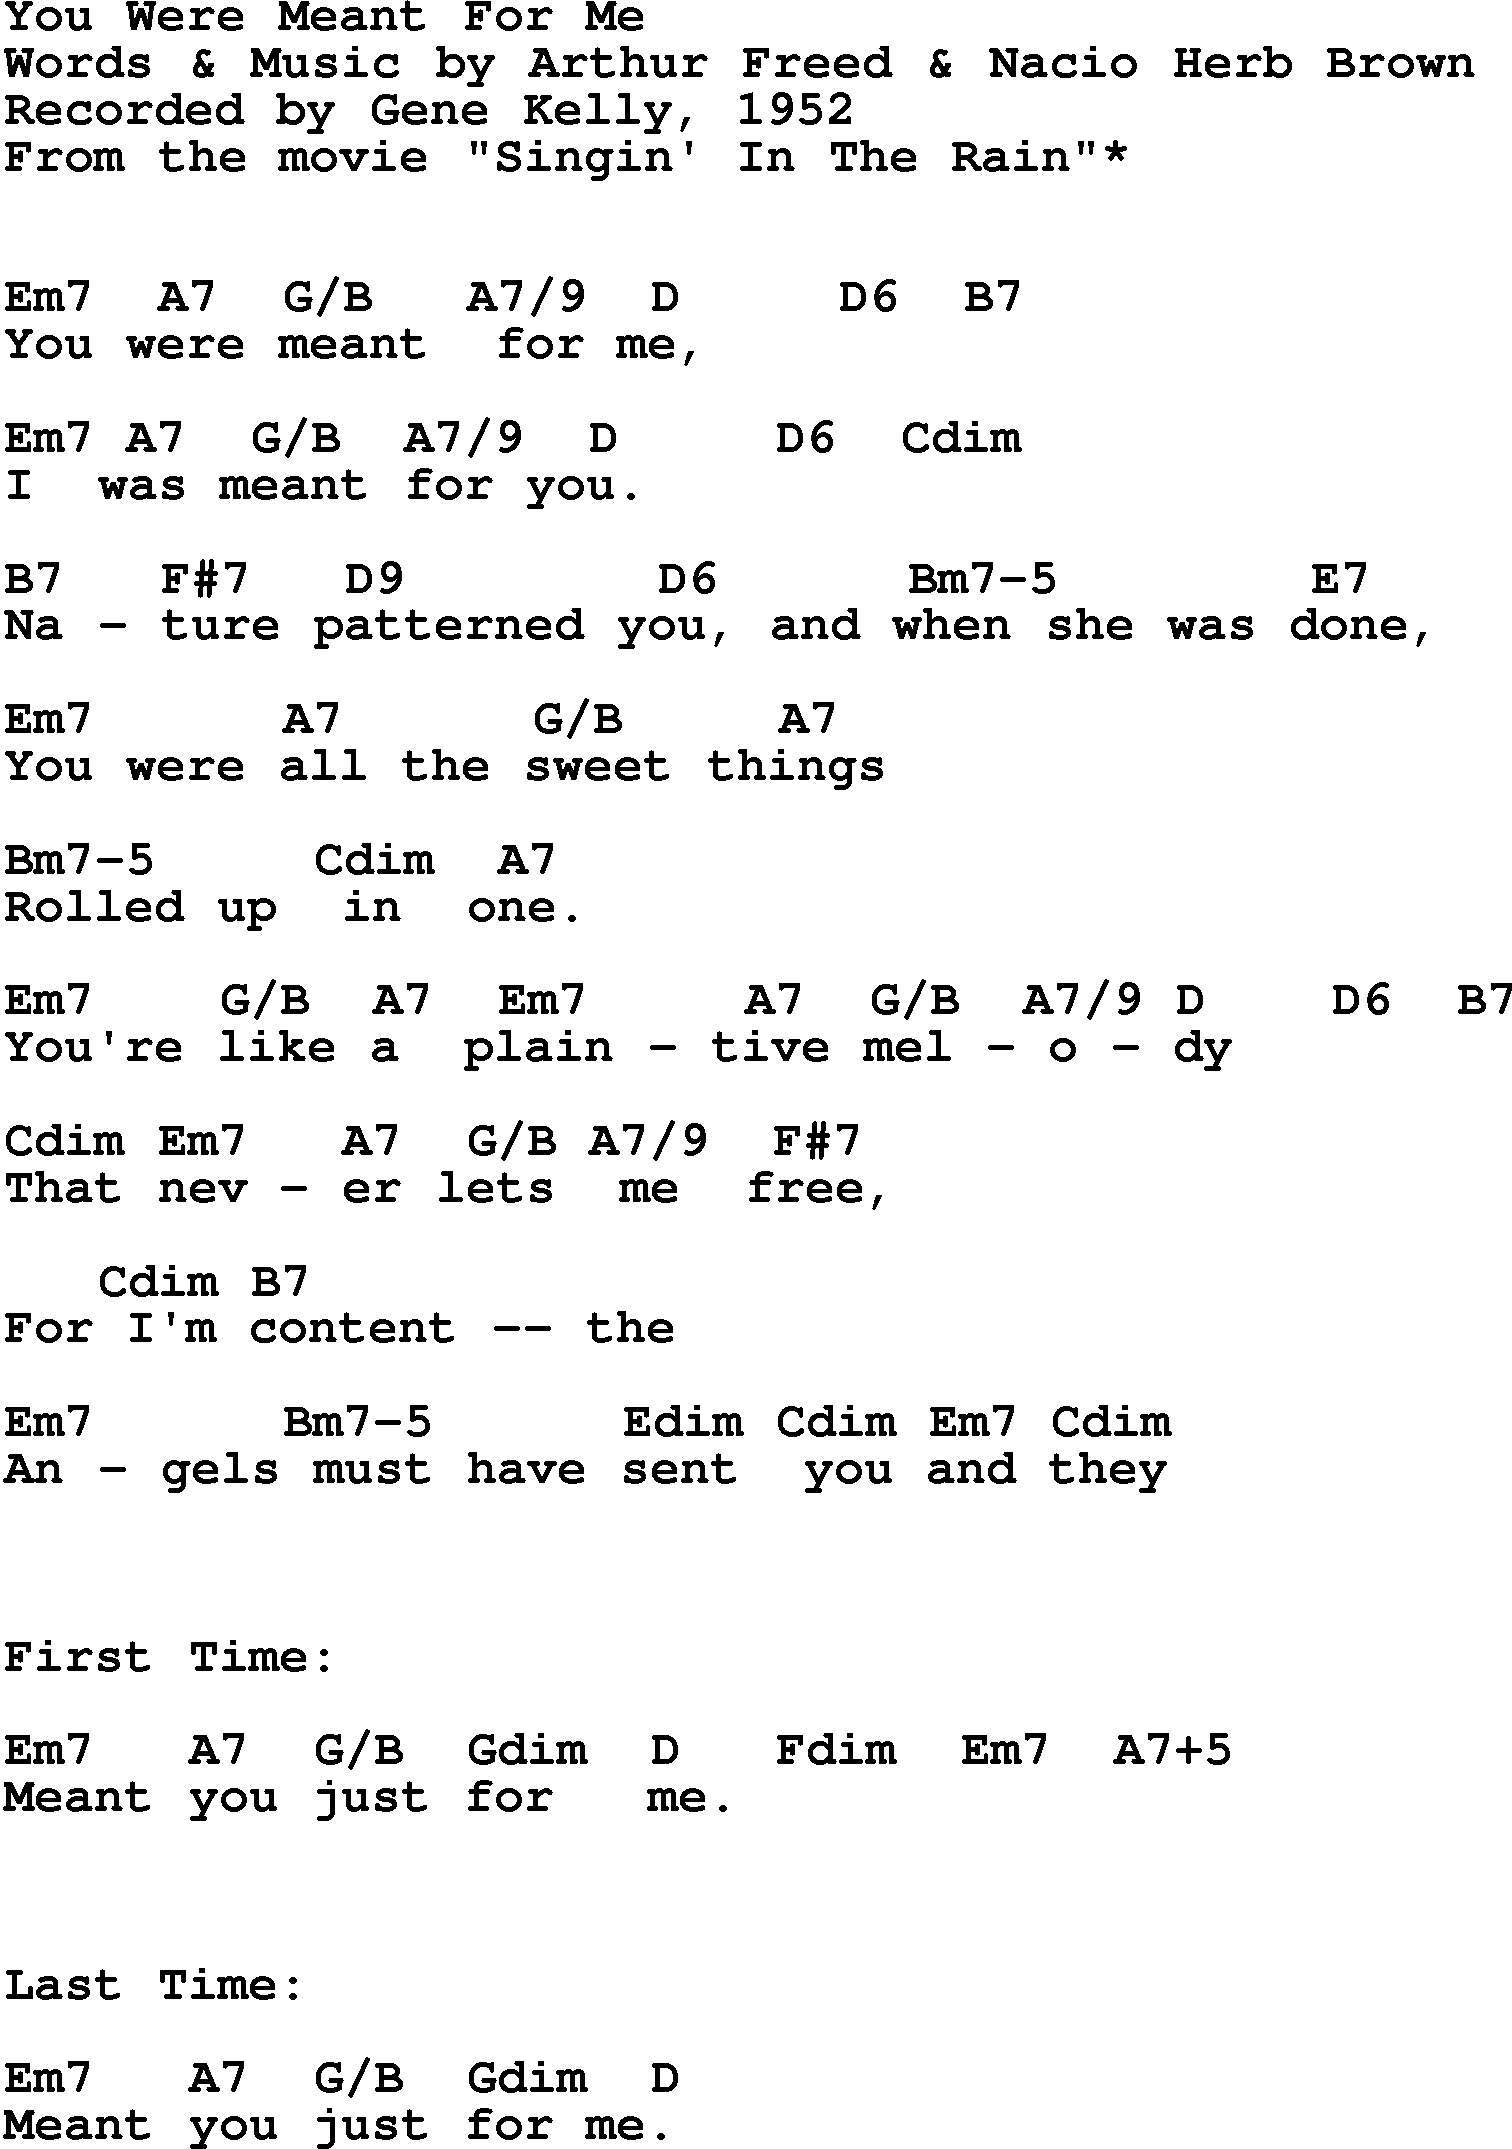 Song Lyrics with guitar chords for You Were Meant For Me - Gene Kelly, 1952